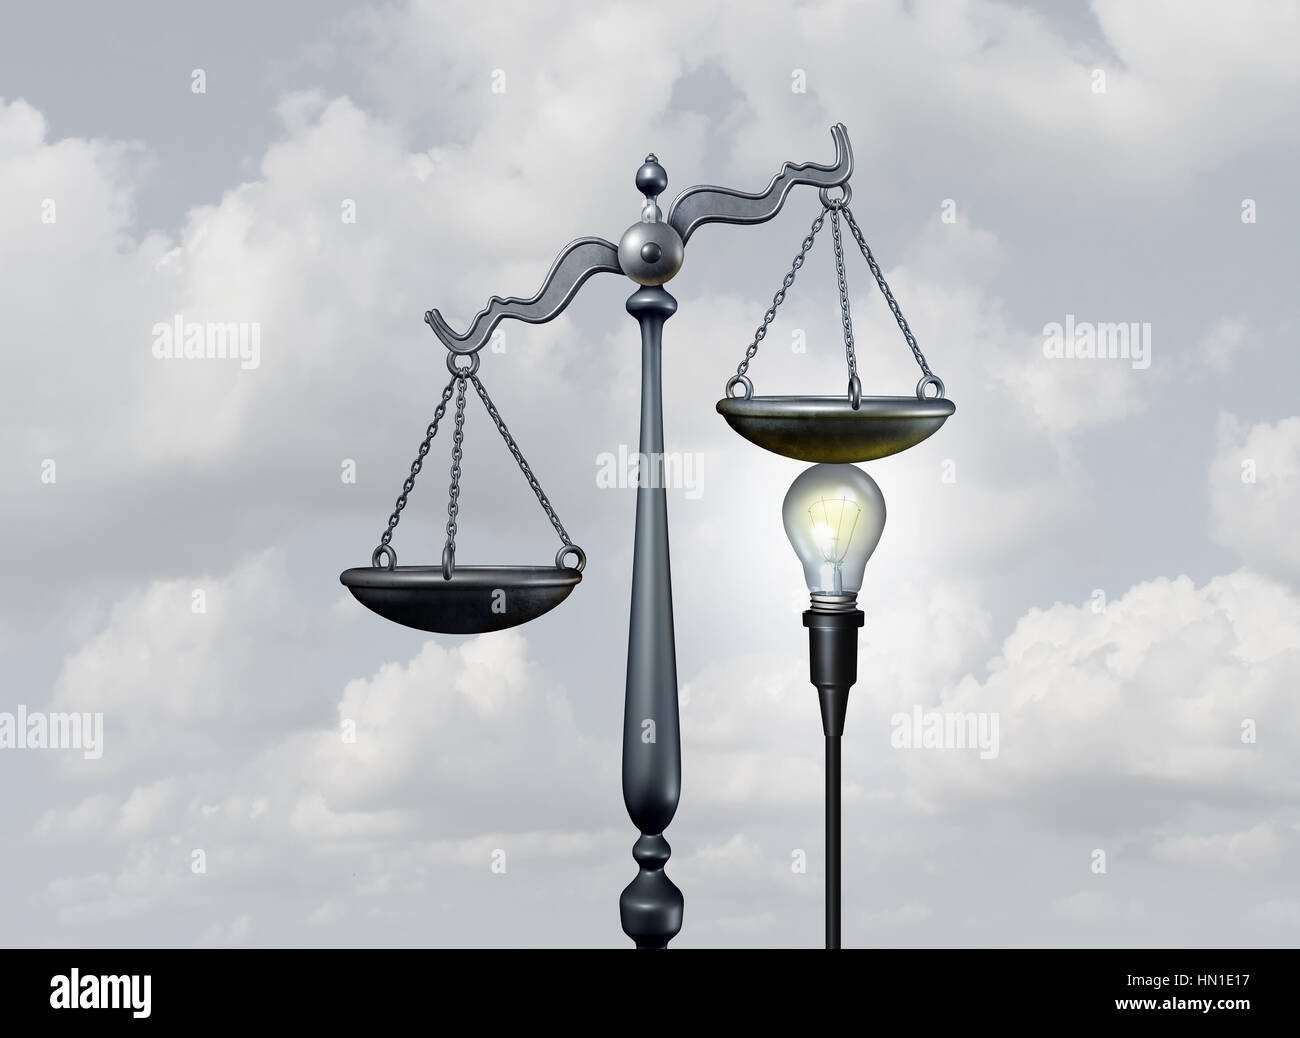 Legal ideas and creative justice concept as a bright light bulb tipping the scale of judgement as lawyer services or legislation metaphor or mediation Stock Photo